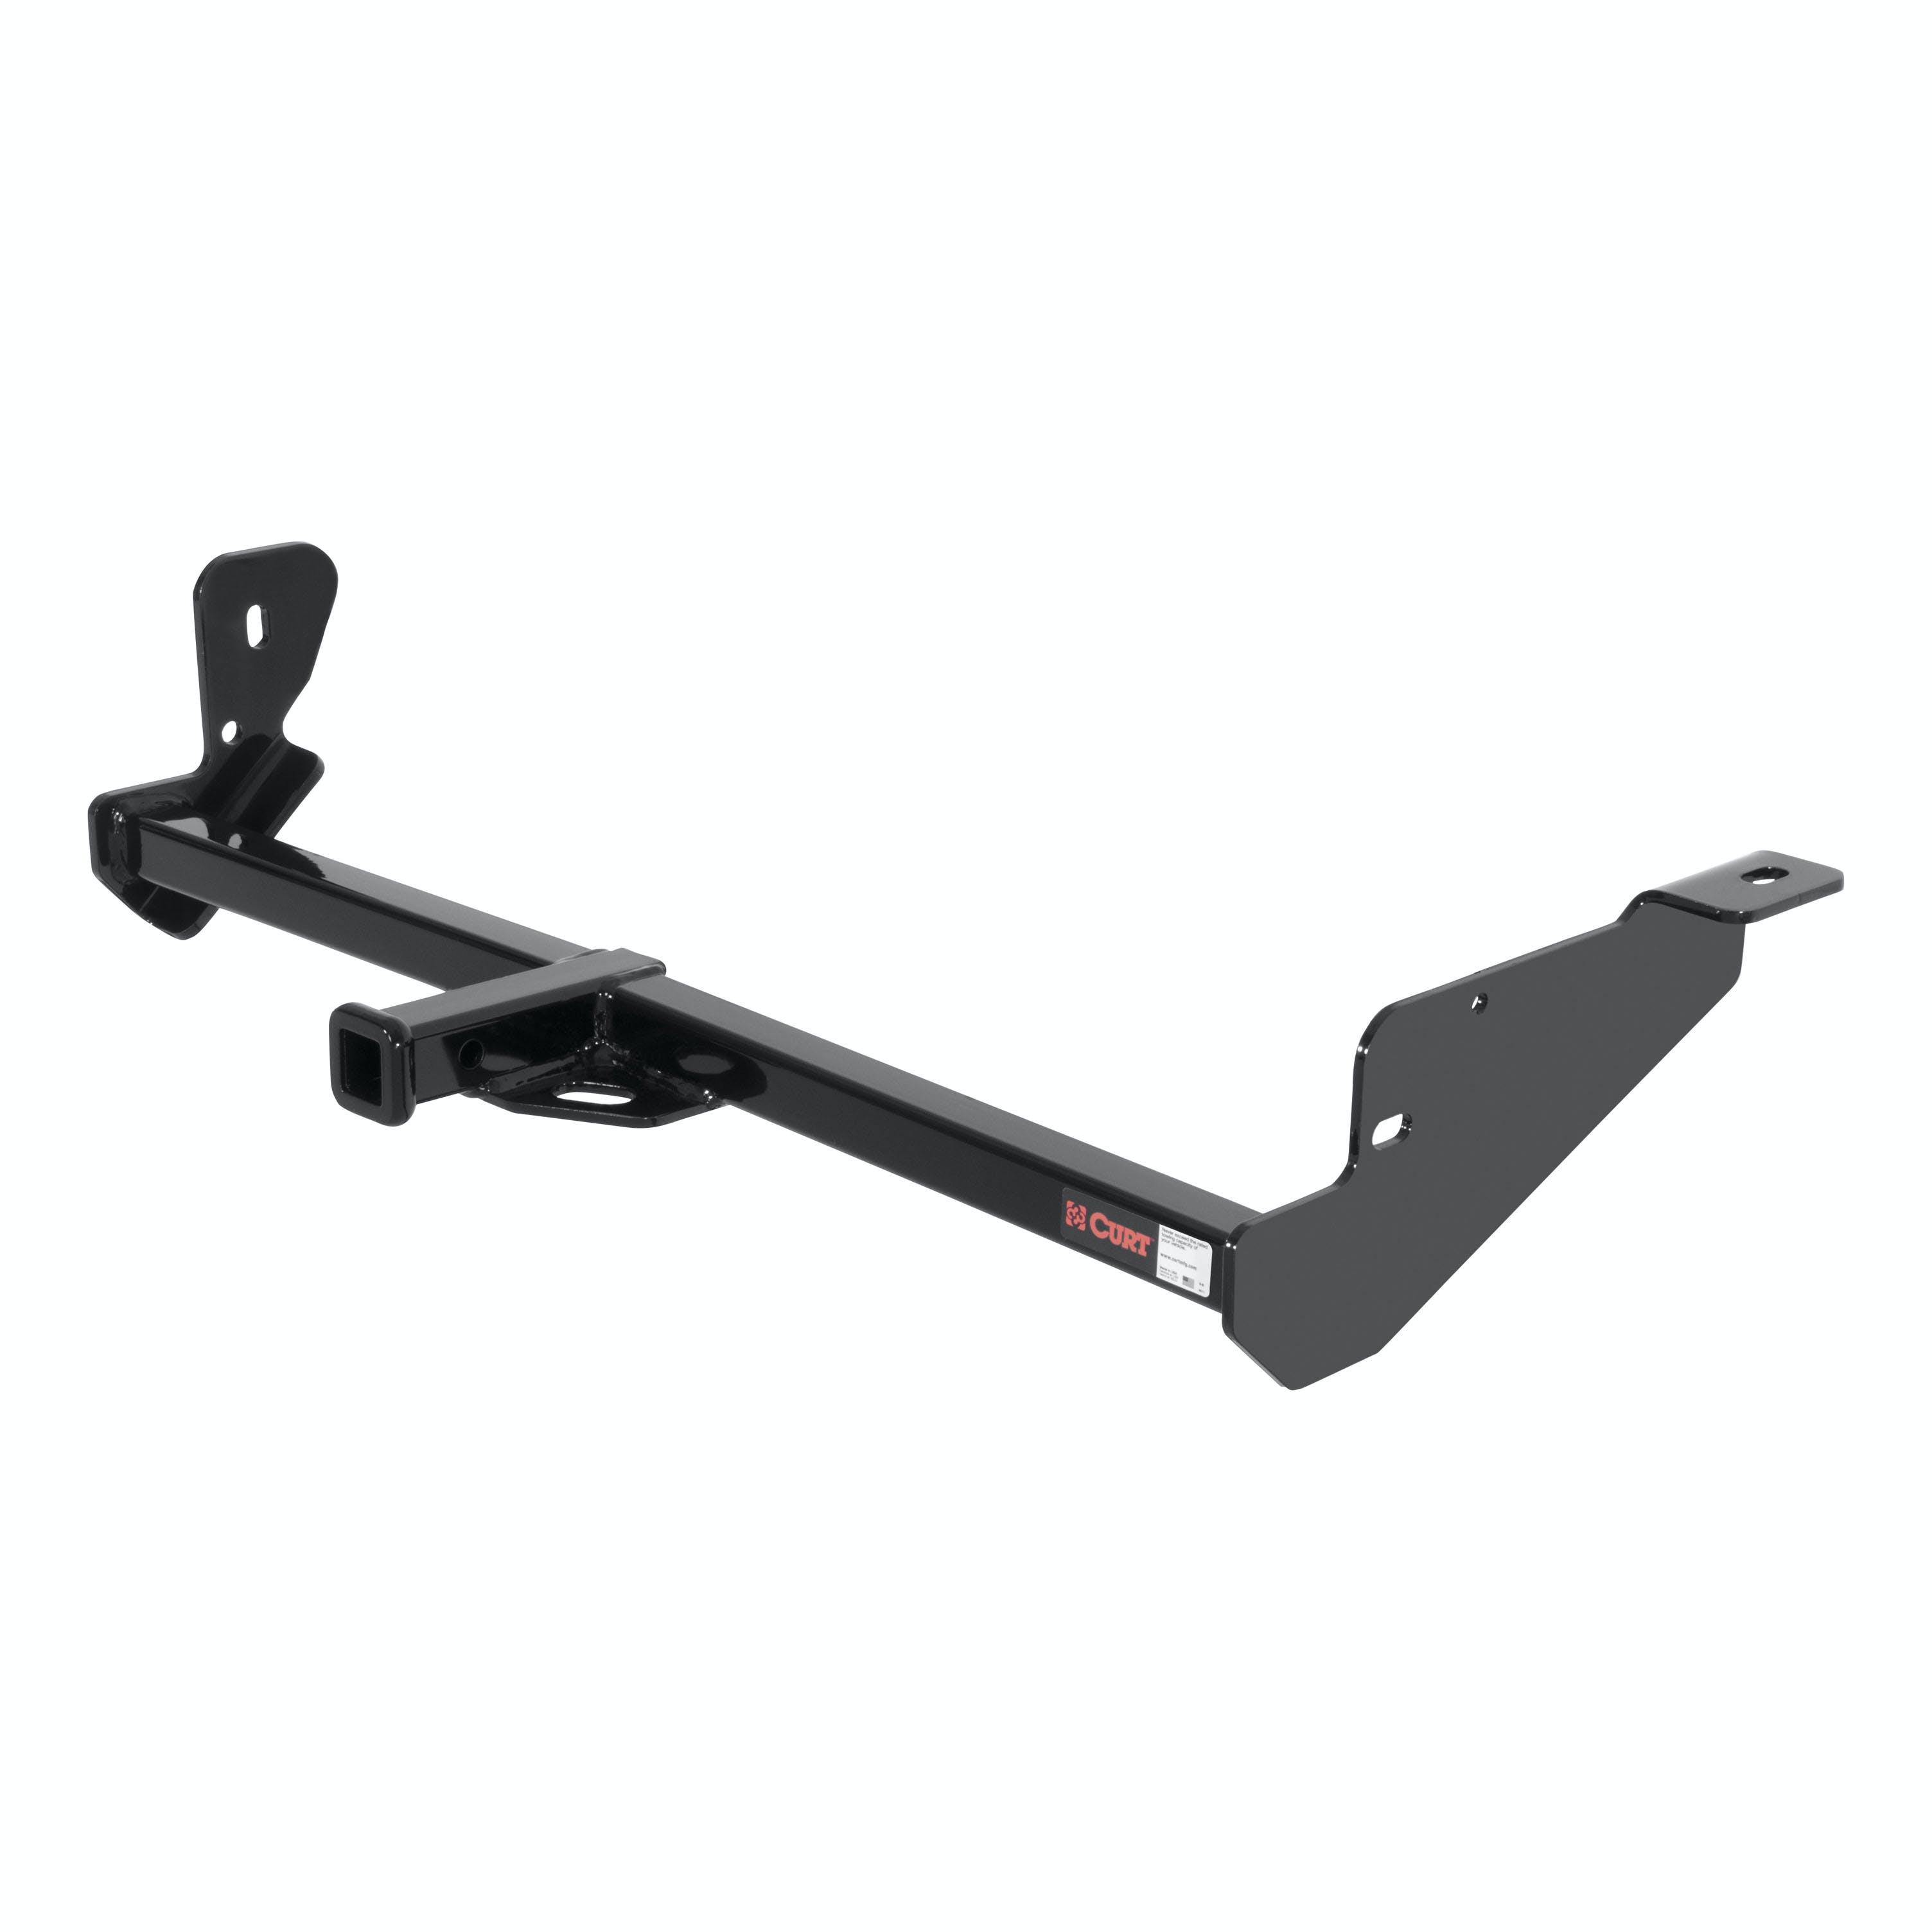 CURT 11294 Class 1 Trailer Hitch, 1-1/4 Receiver, Select Ford Focus